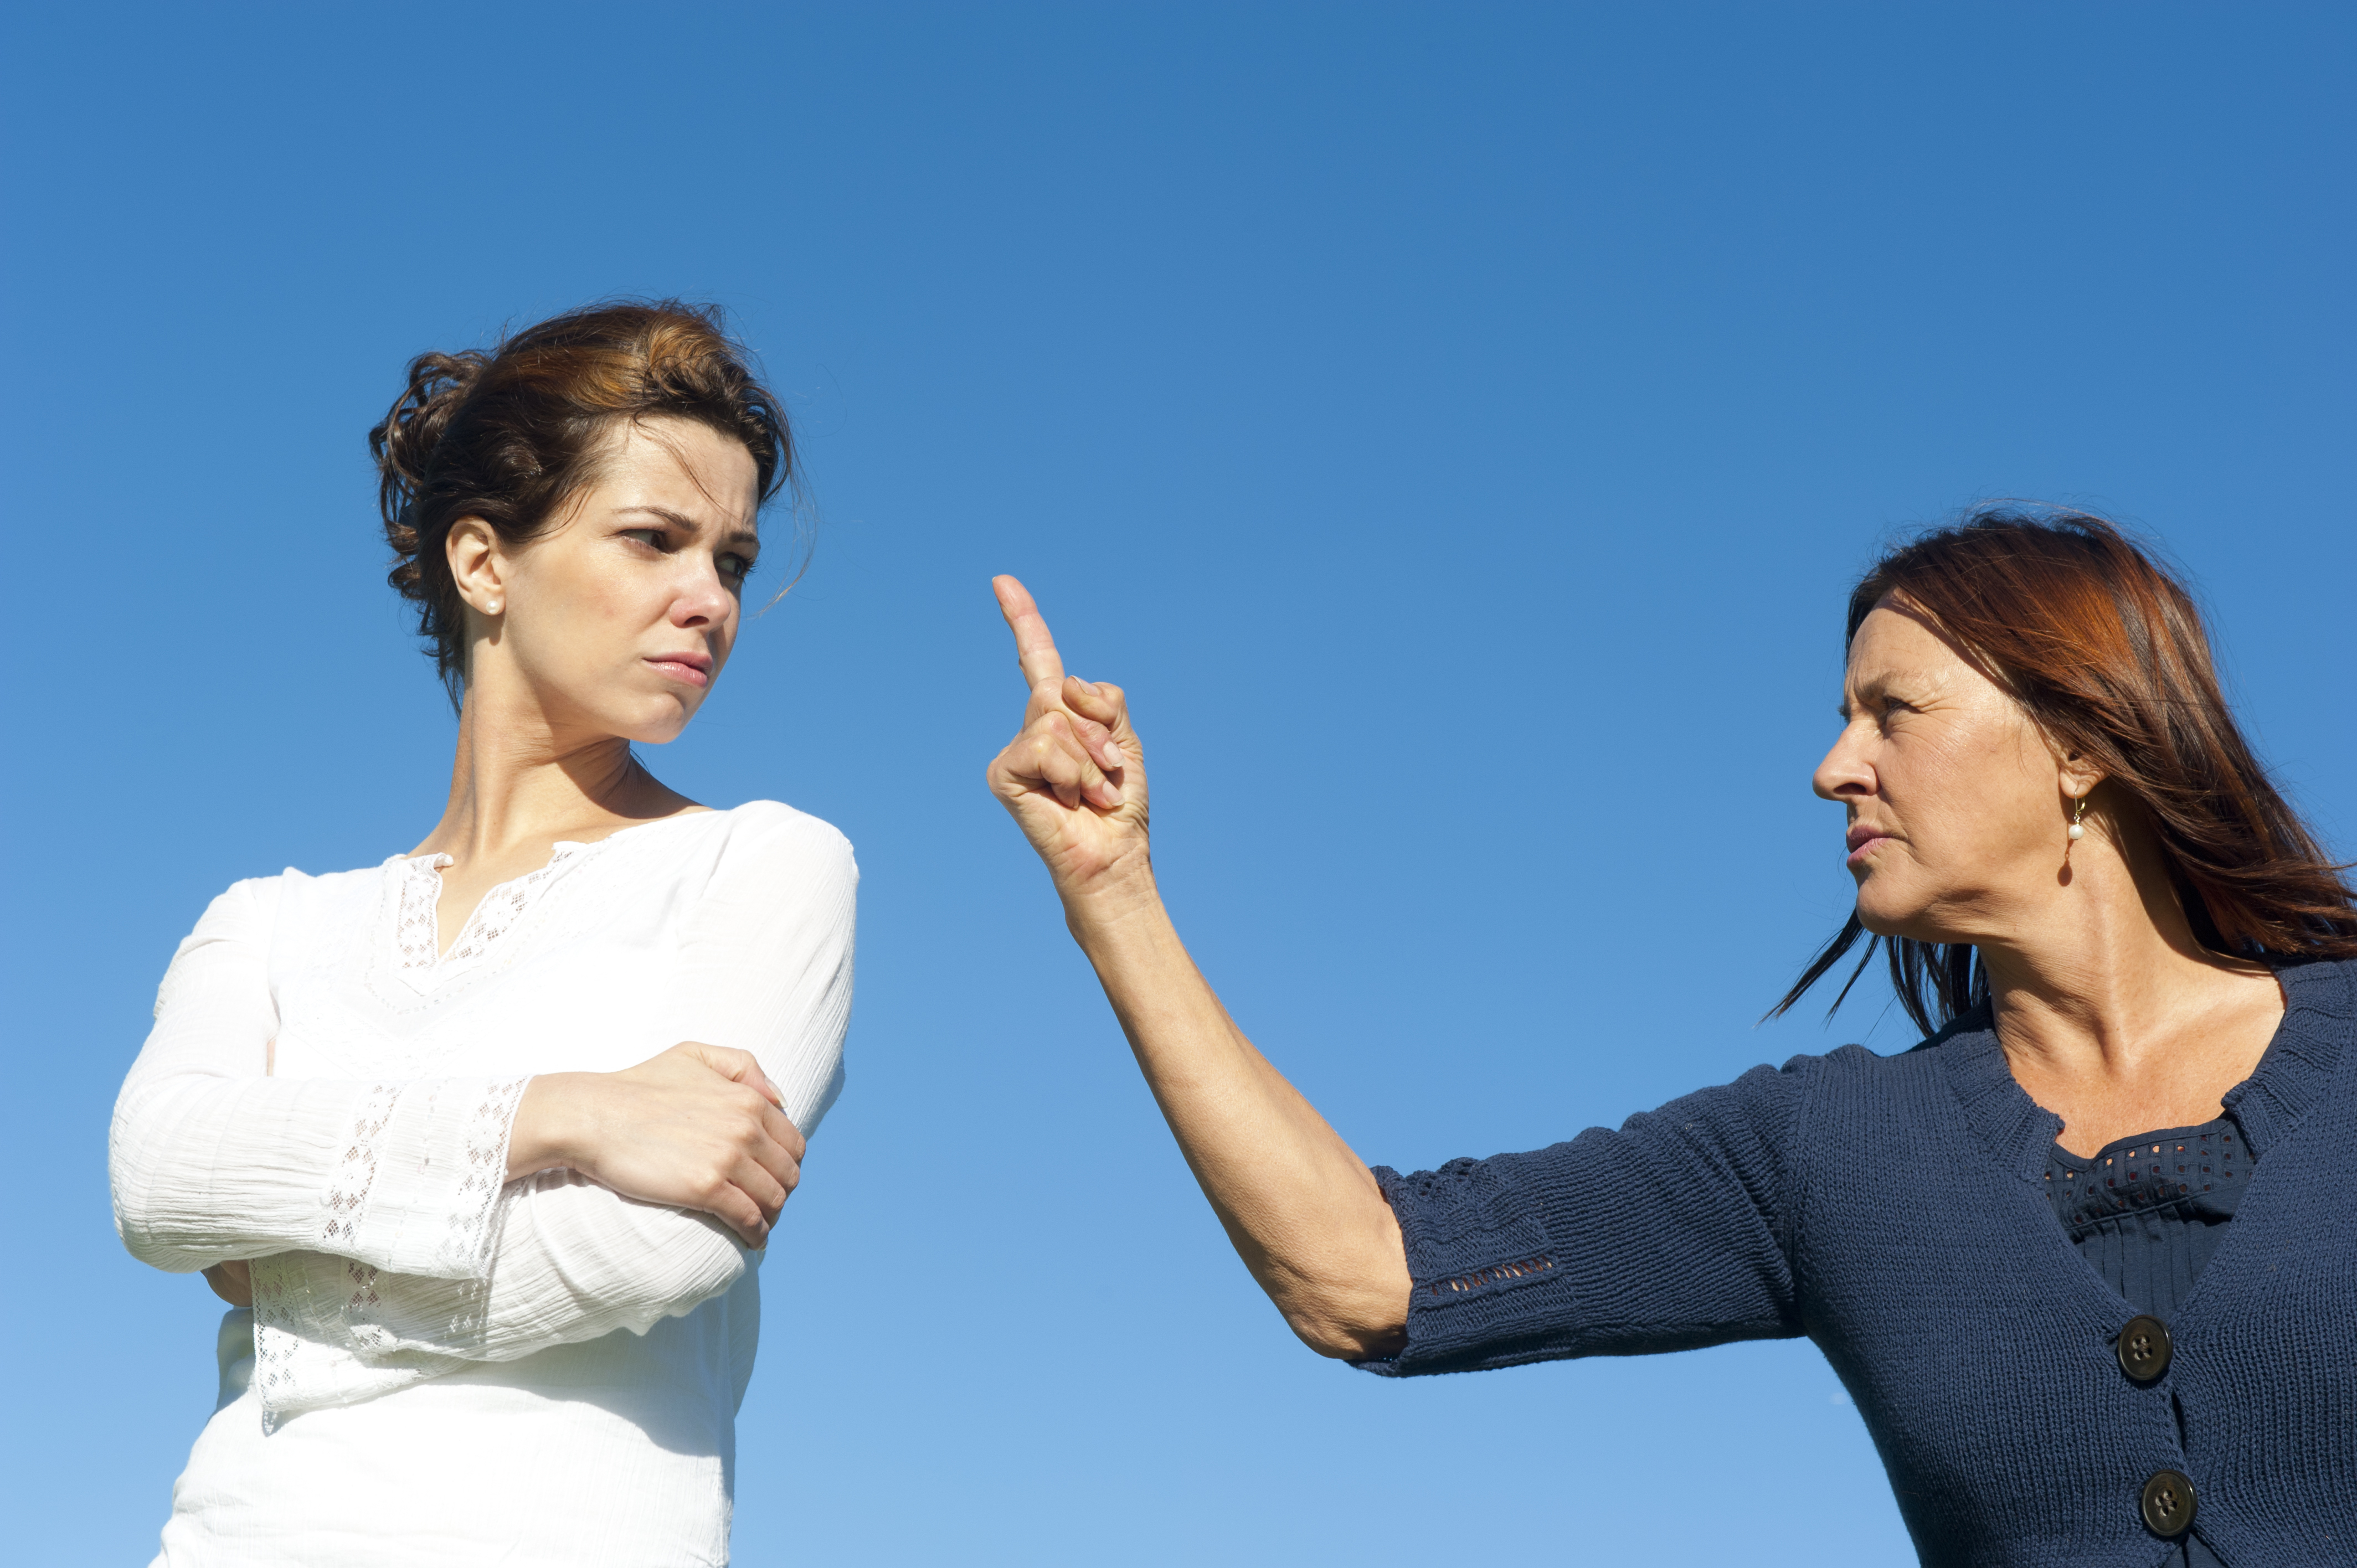 A woman angrily pointing her finger at another woman | Source: Shutterstock